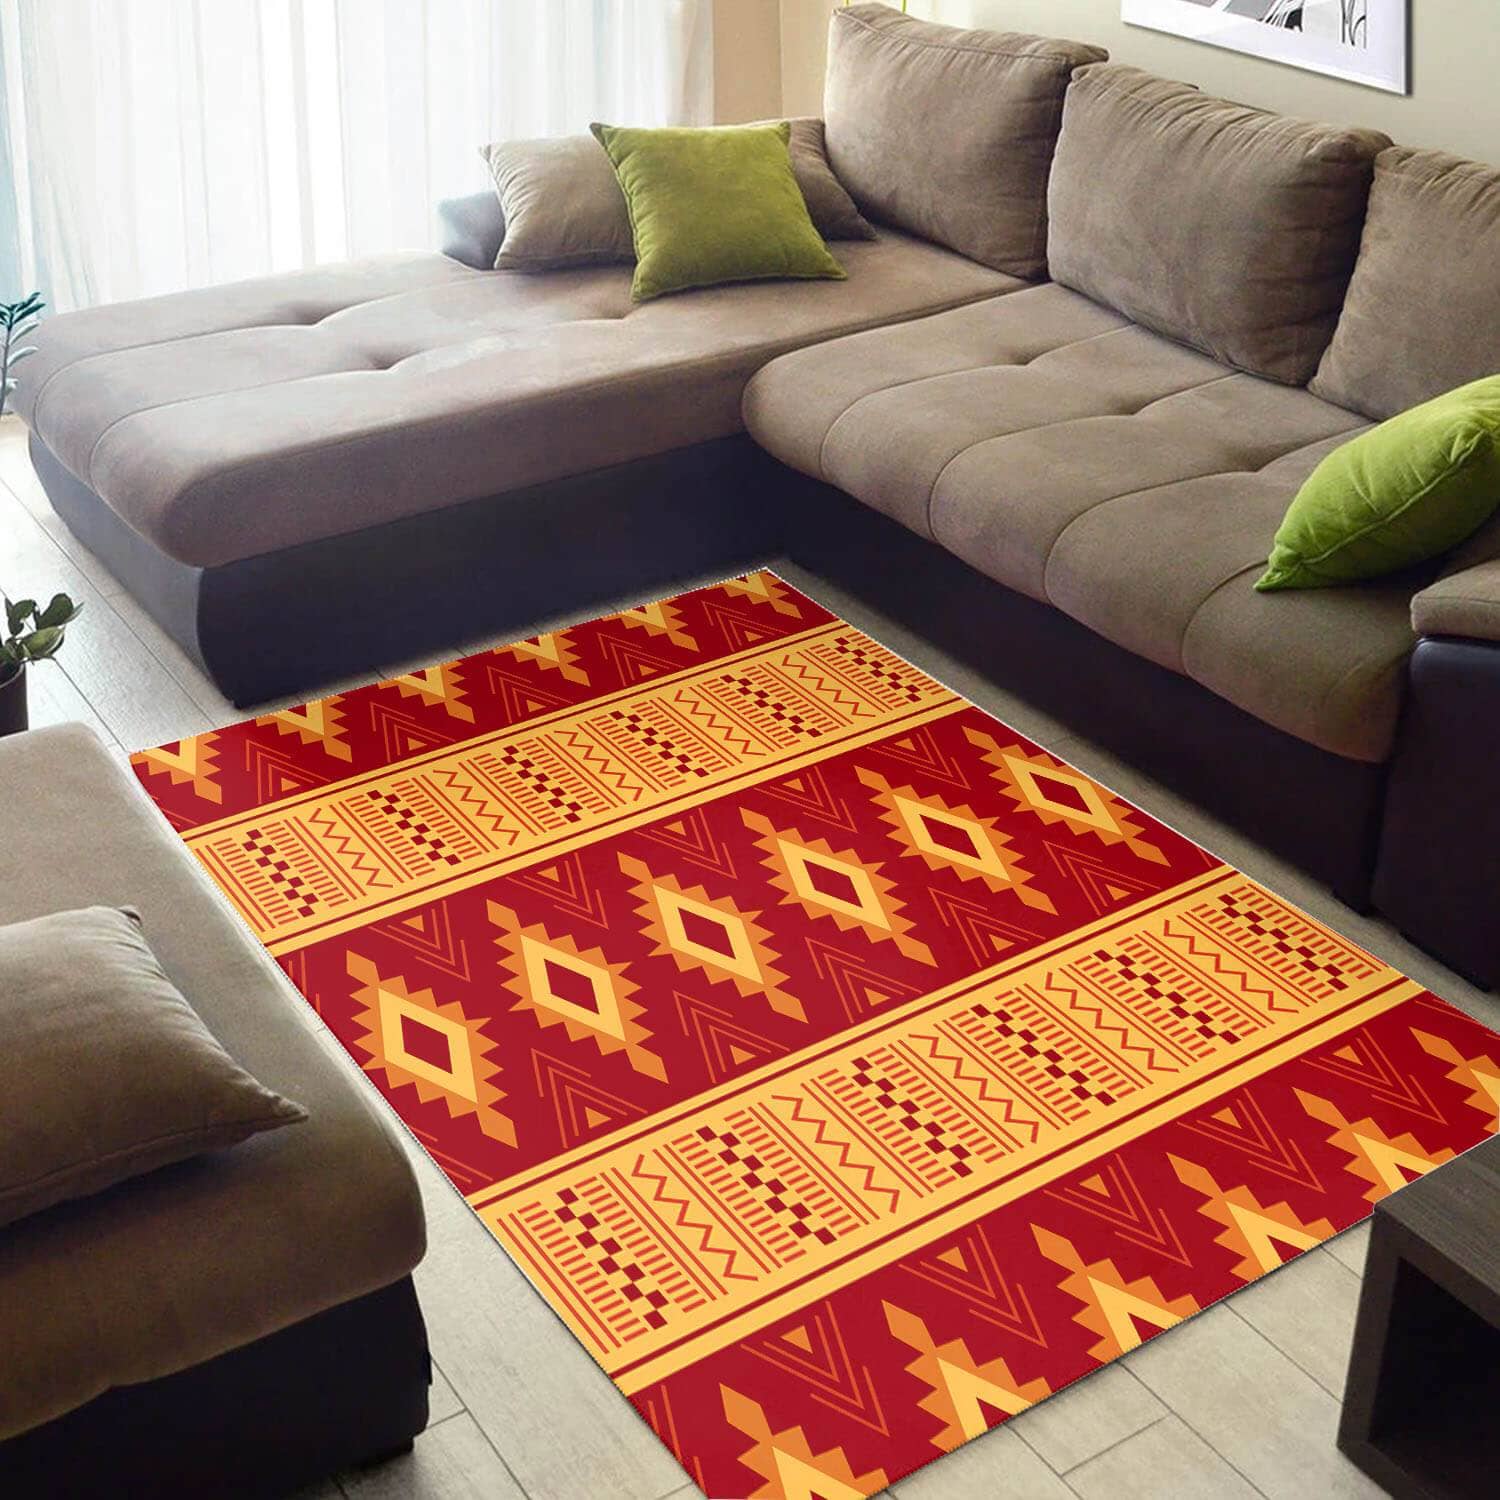 Beautiful African Retro Black History Month Afrocentric Art Themed Room Rug